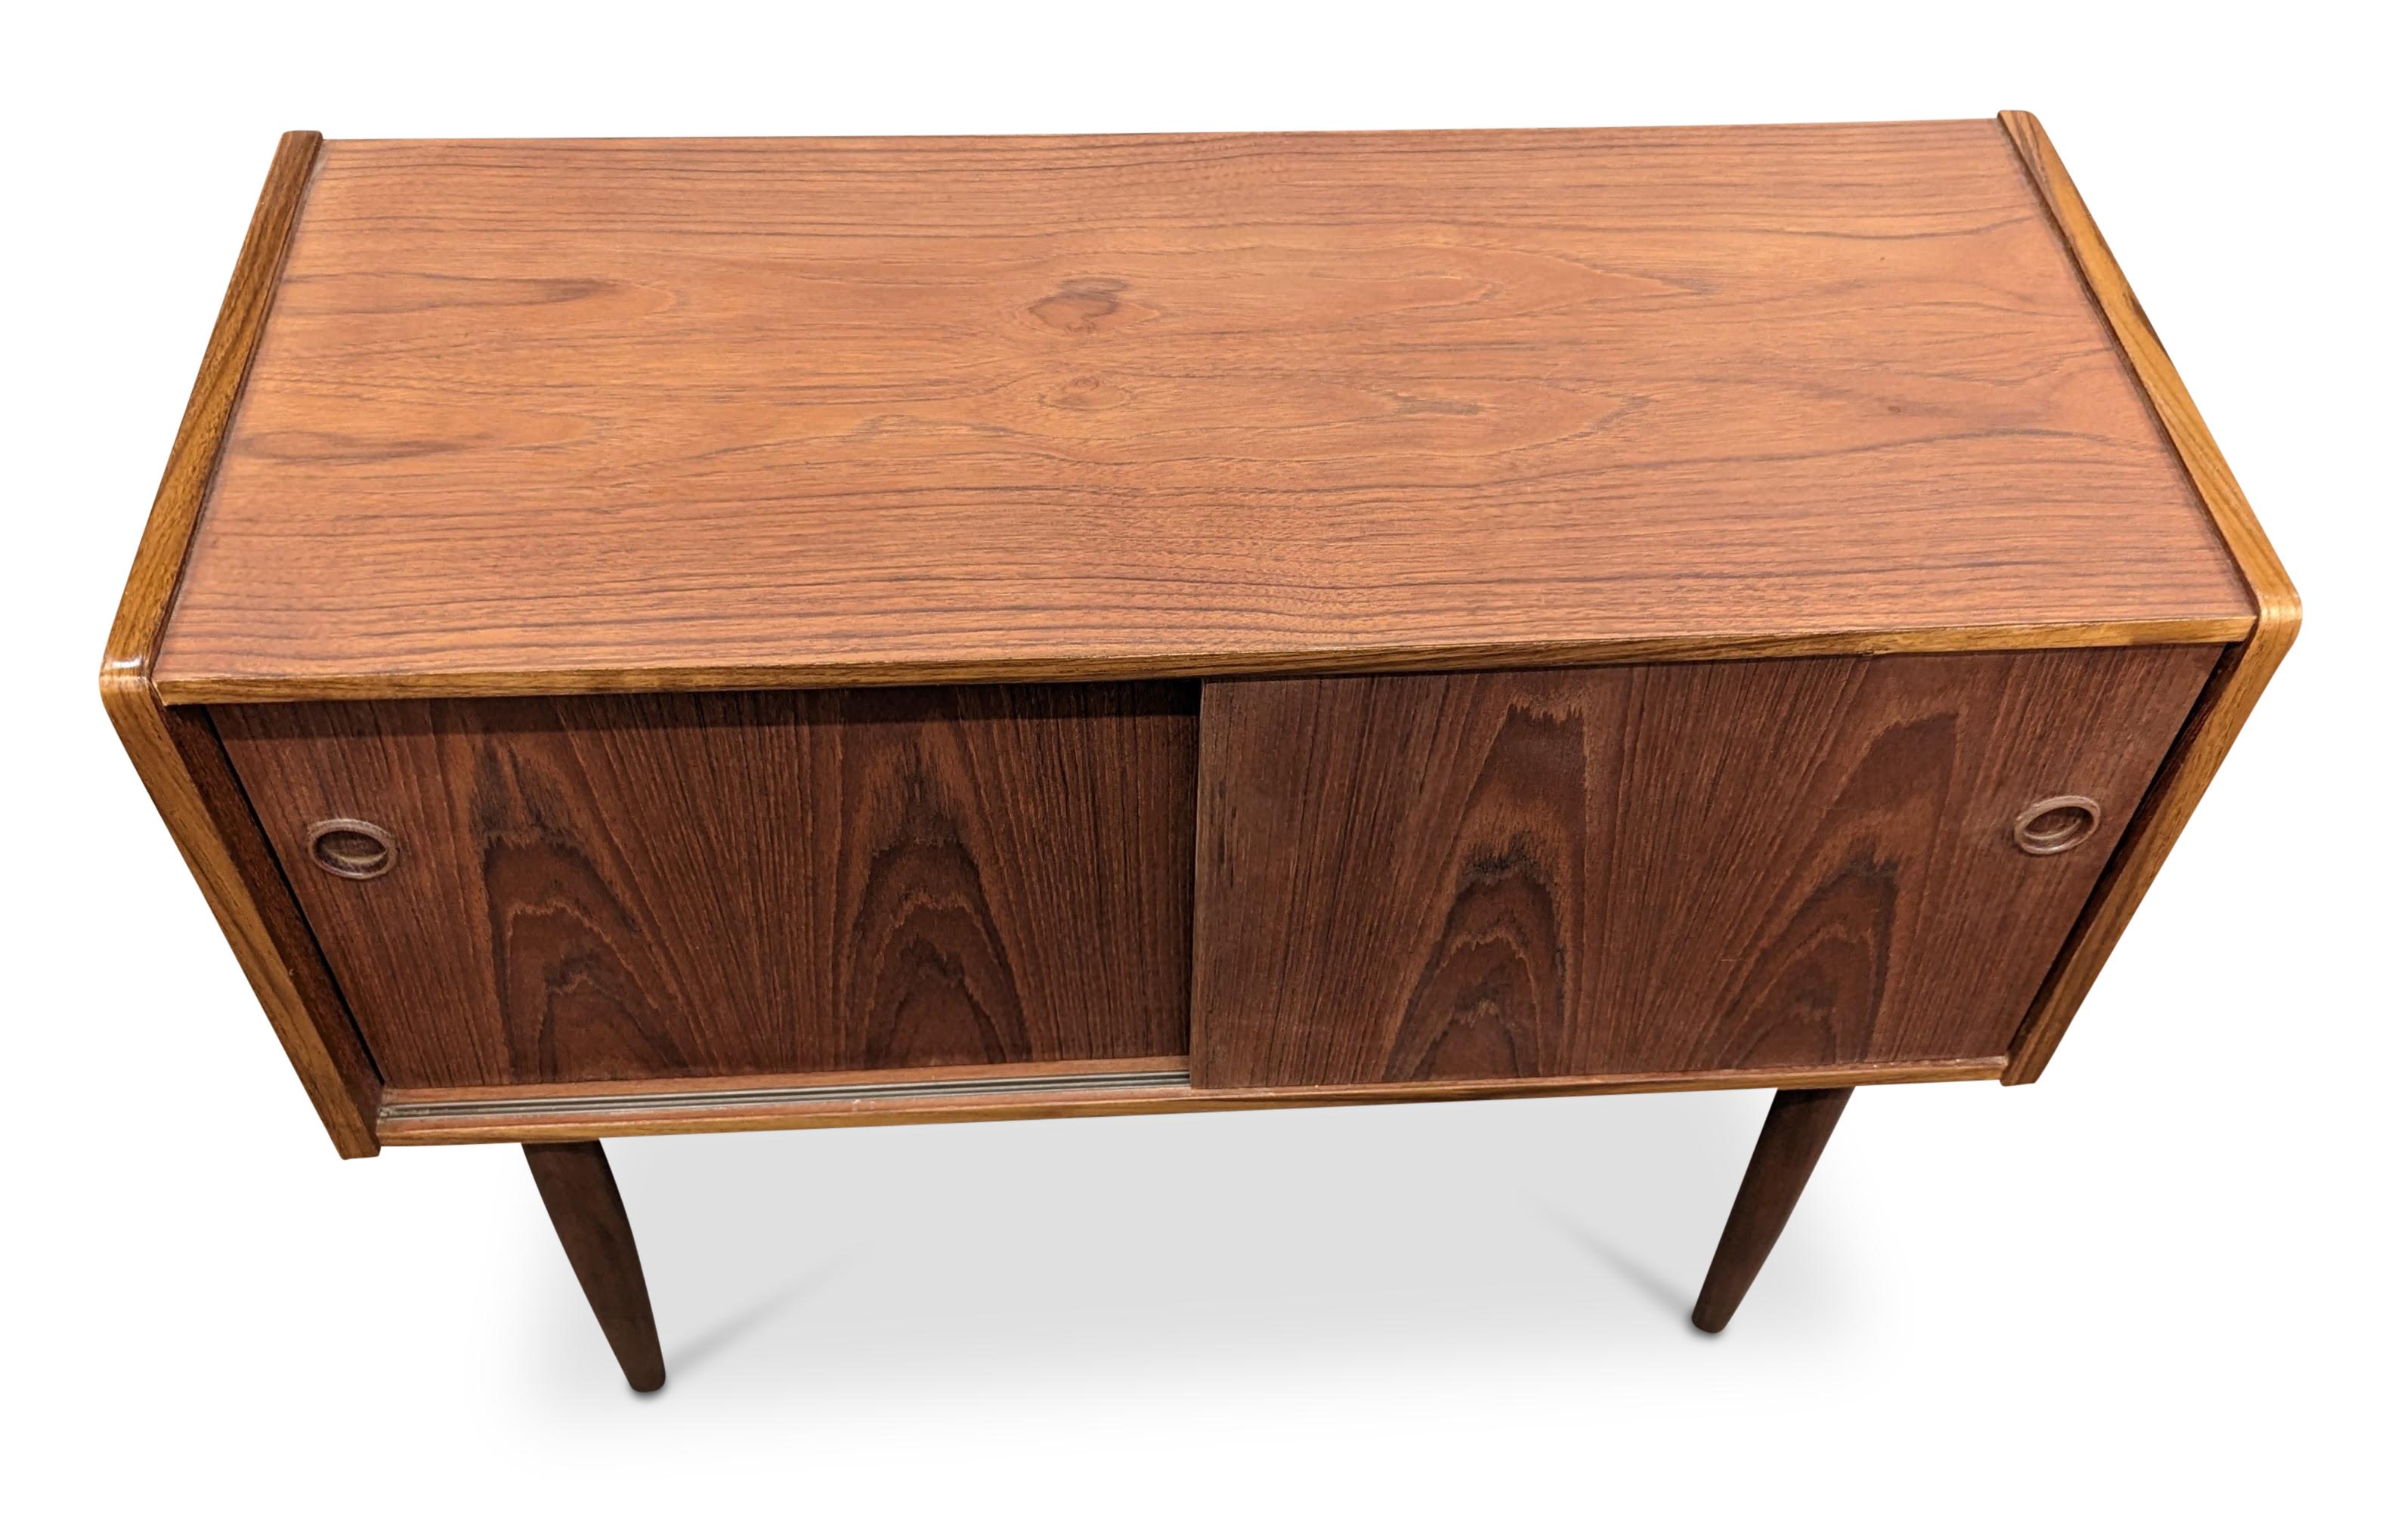 Vintage Danish Mid-Century Modern, made in the 1950s - Recently refurbished

The piece is more than 65+ years old and some wear and tear can be expected, but we do everything we can to refurbish them in respect to the design.

There is a science